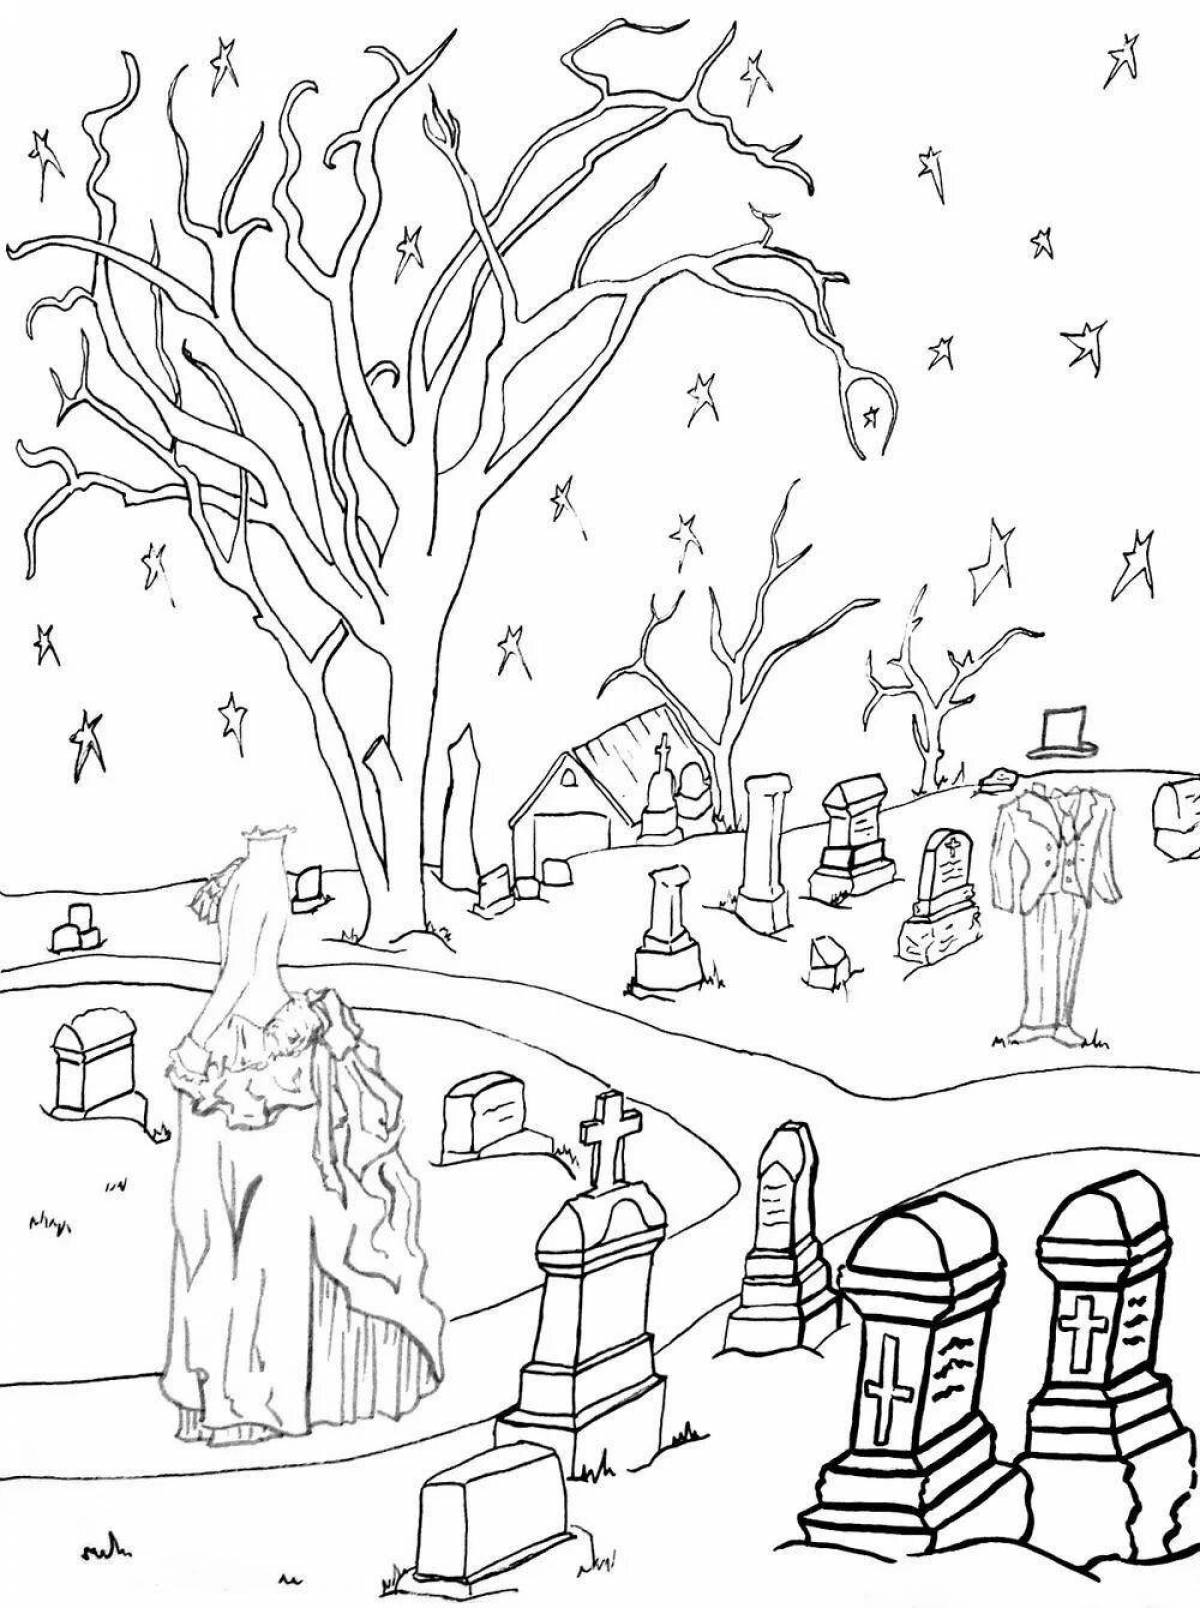 Haunted graveyard coloring page